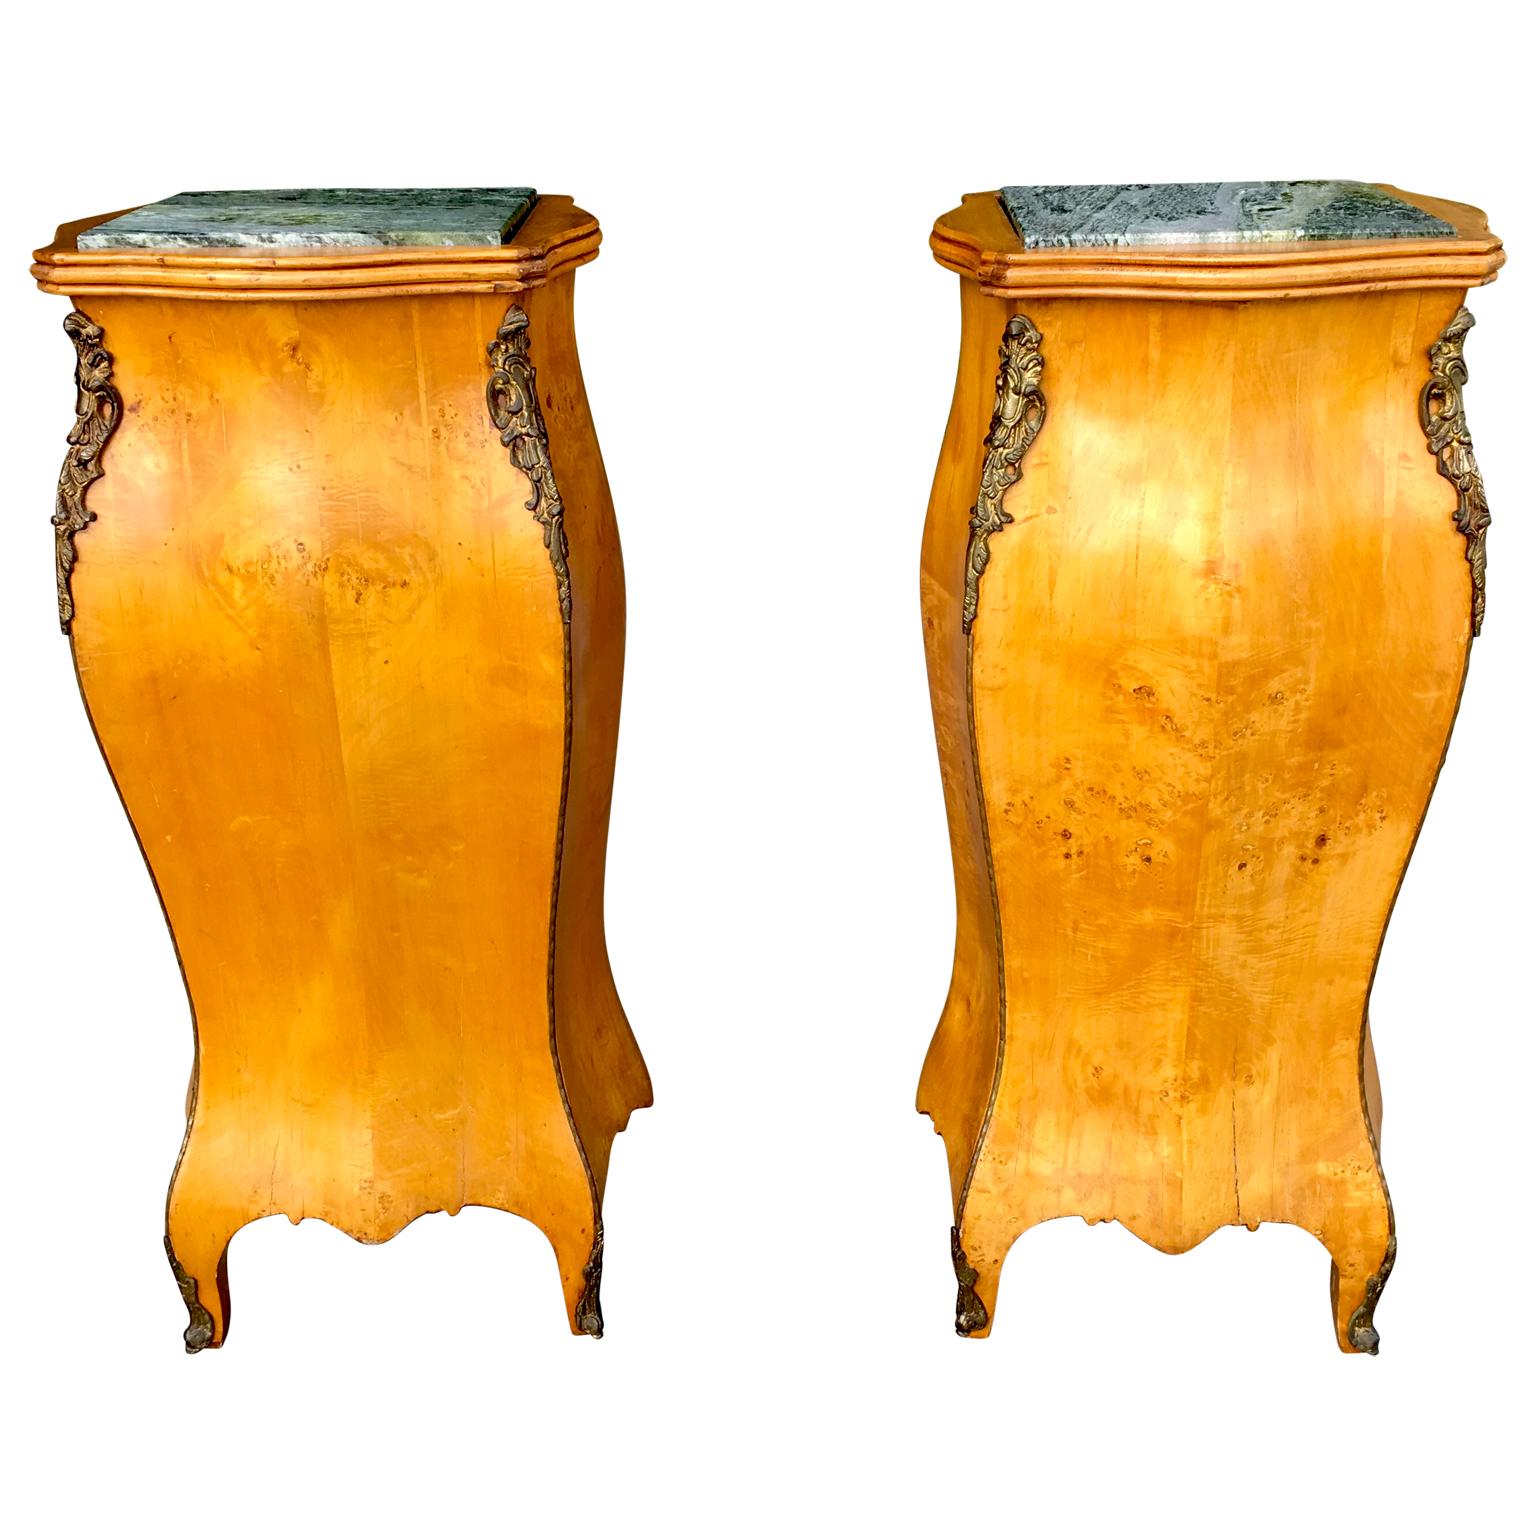 Pair of french burl wood Bombay gilt bronze Louis XV pedestal stands.